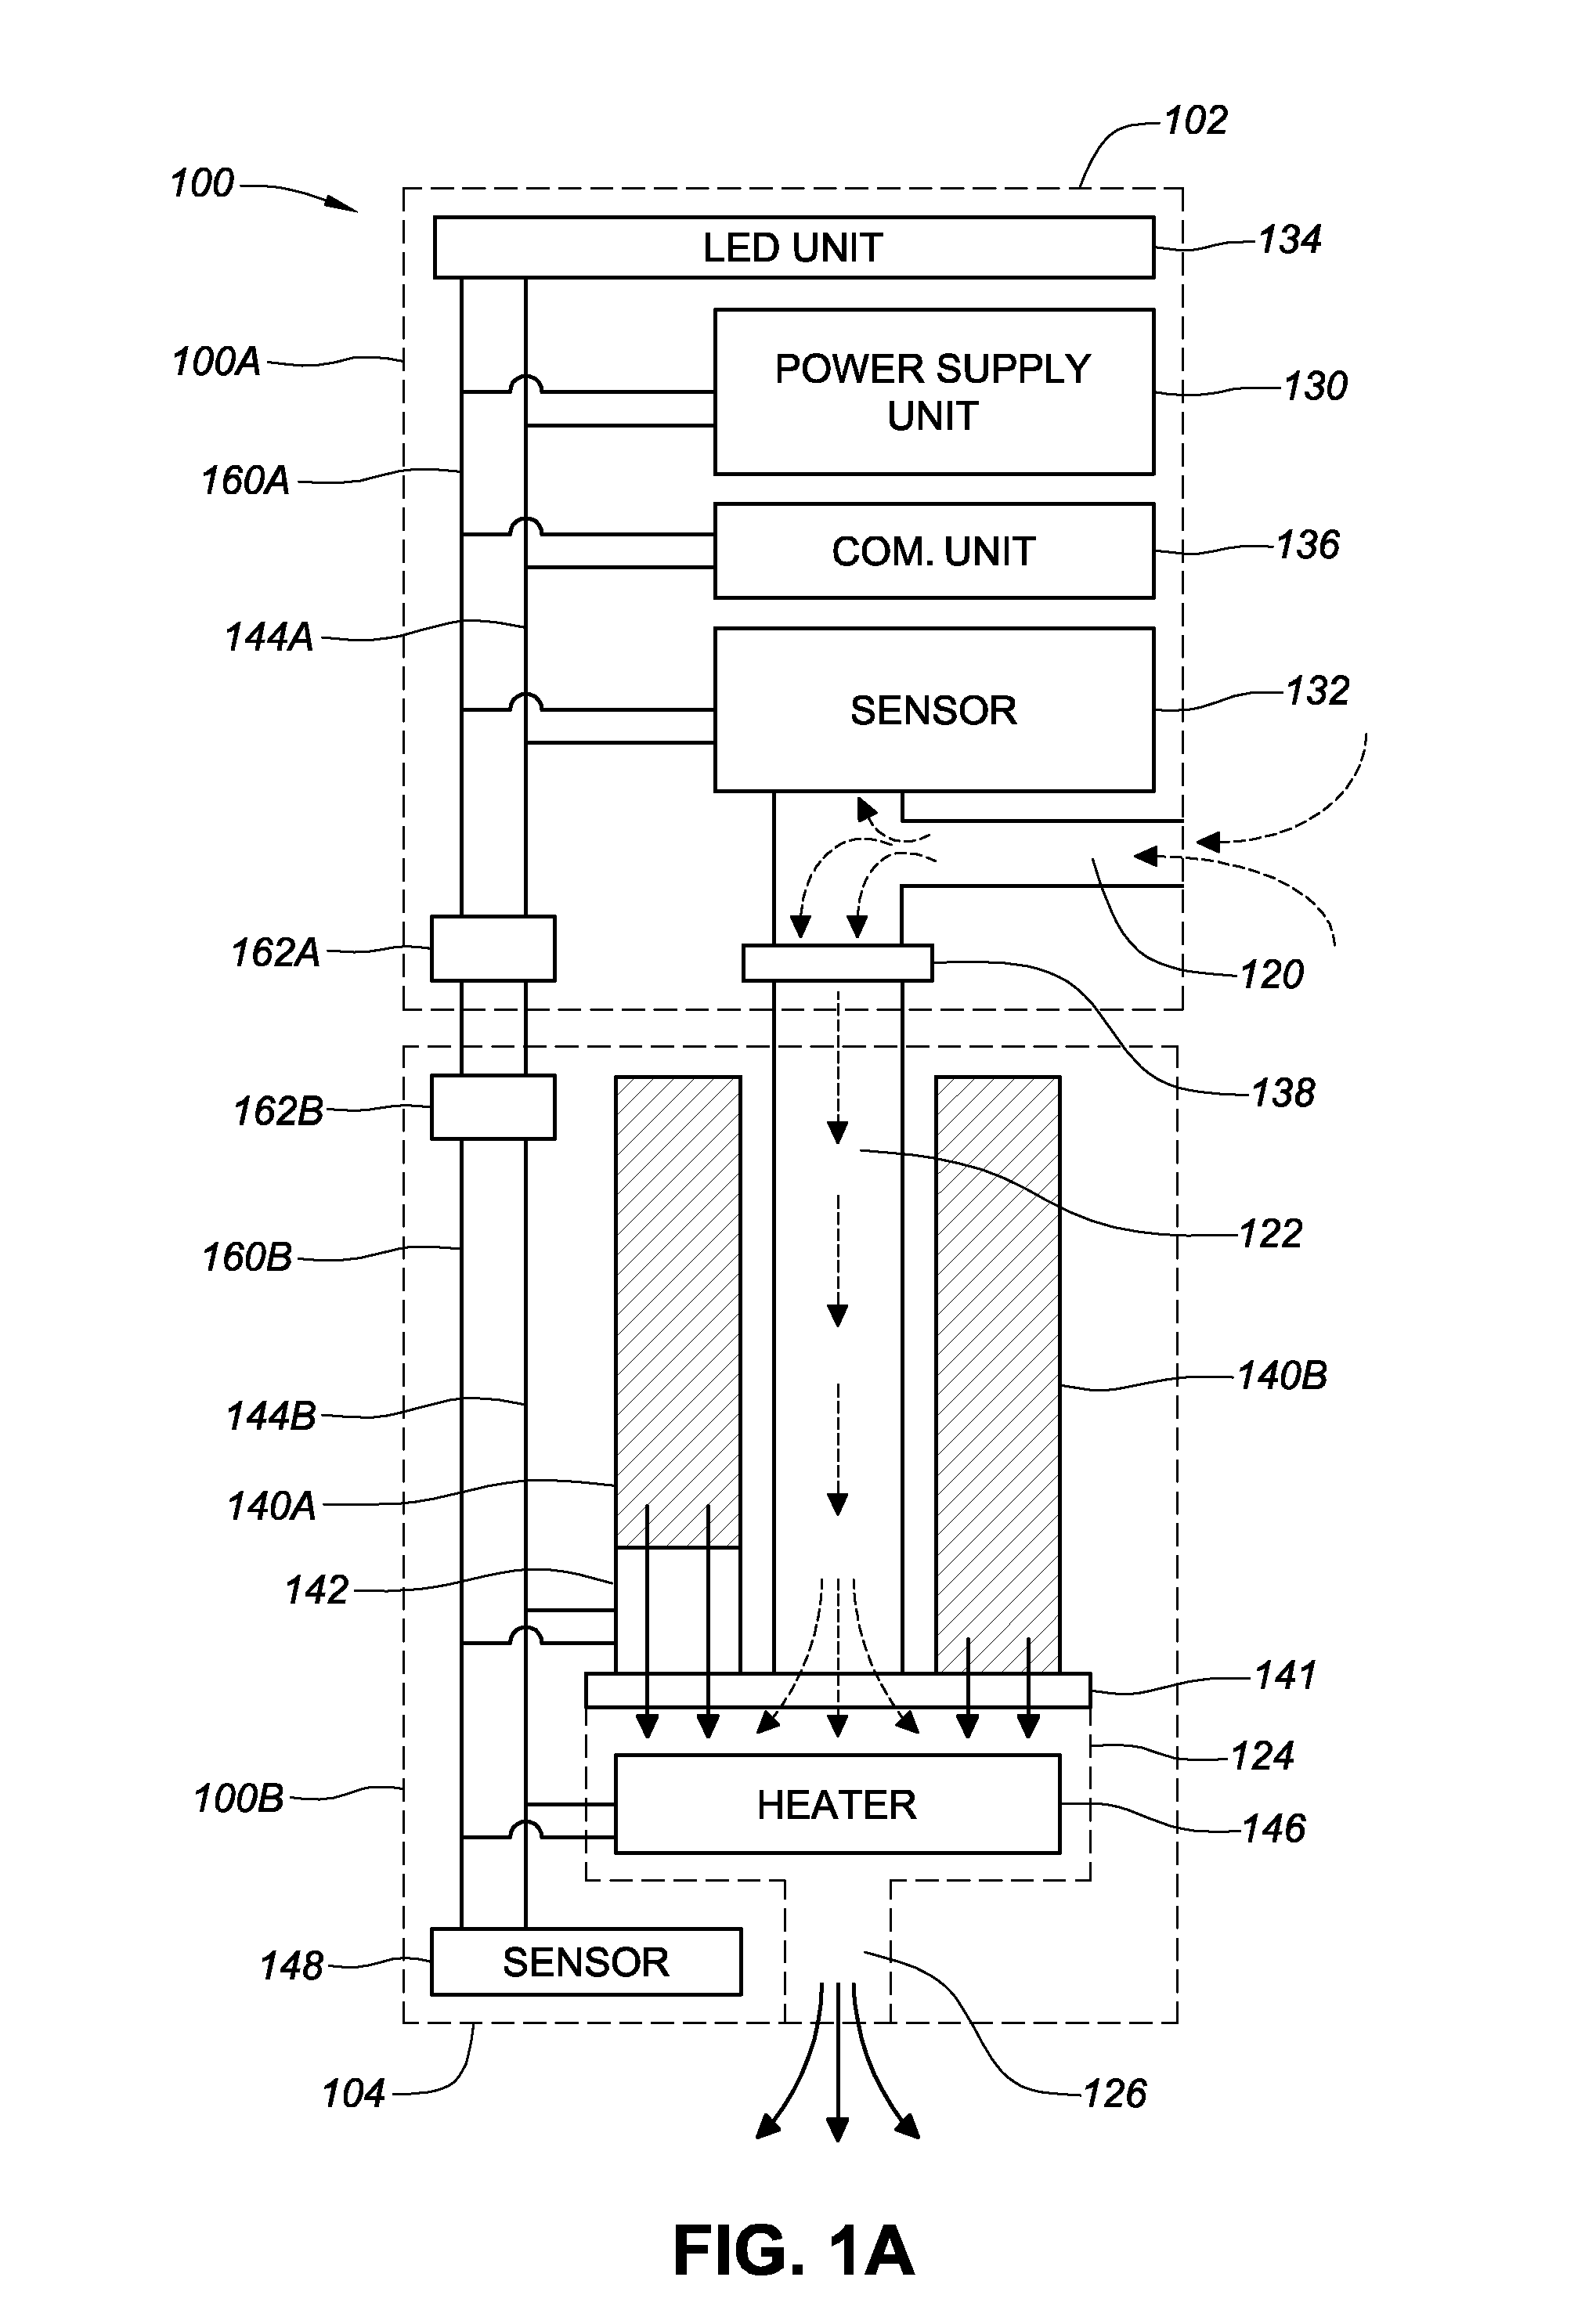 Electronic smoking device and data exchange applications